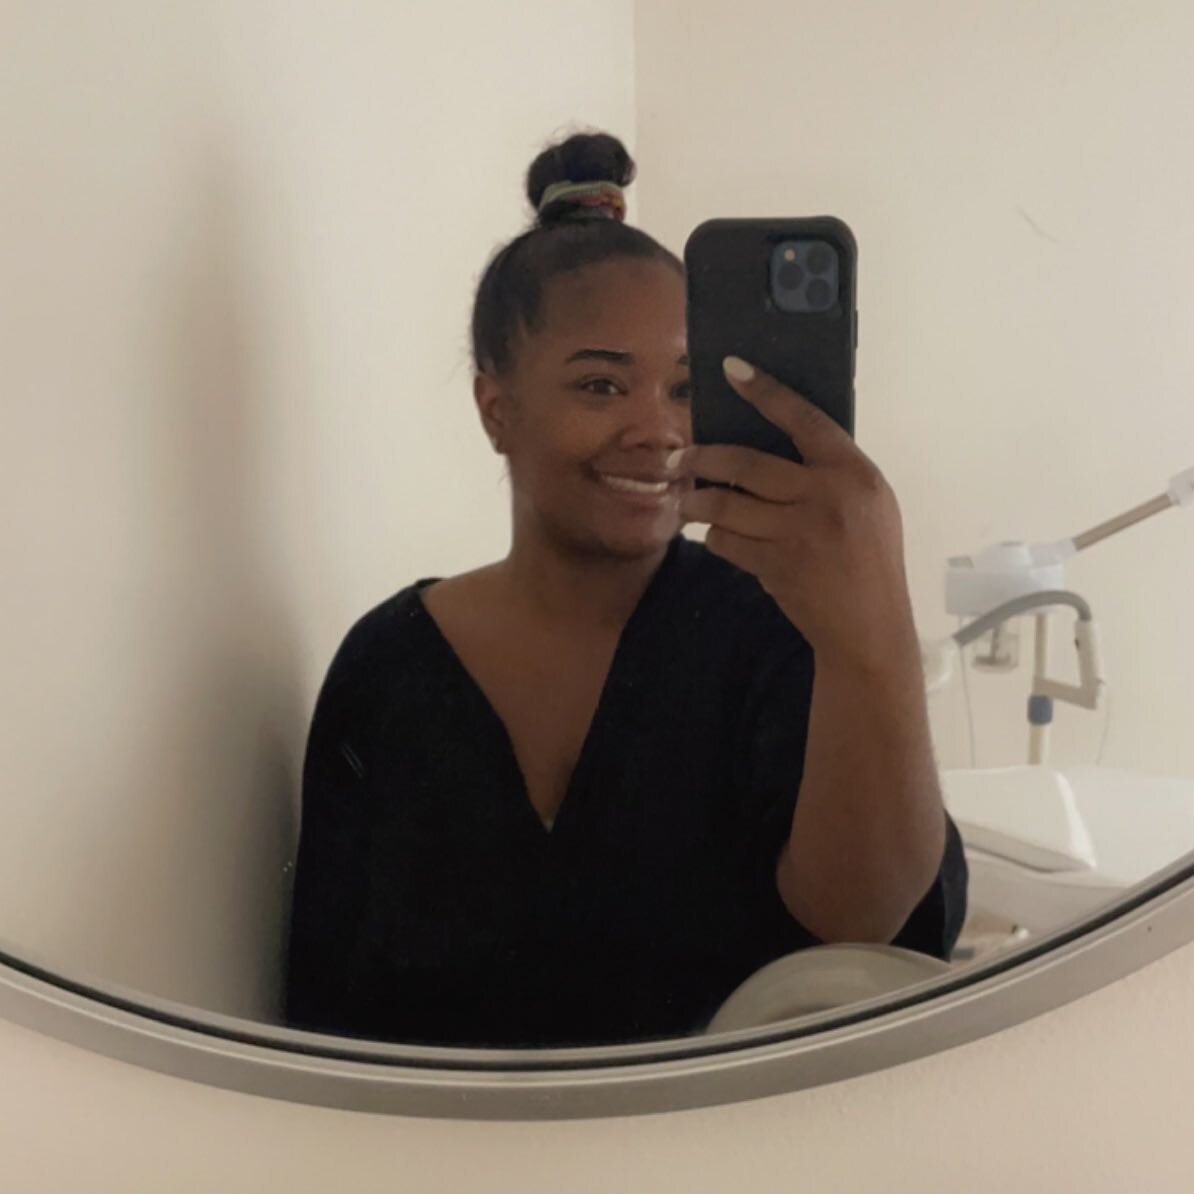 All smiles because I live through gratitude, and there&rsquo;s a lot to be grateful for.

Xo 
🤍

#esthetician #estheticsworld #thebayarea #mirrorselfie #gratefulheart #spreadpositivity #taylorjaycape #smallbusiness #empoweringbusiness #thursdaylook